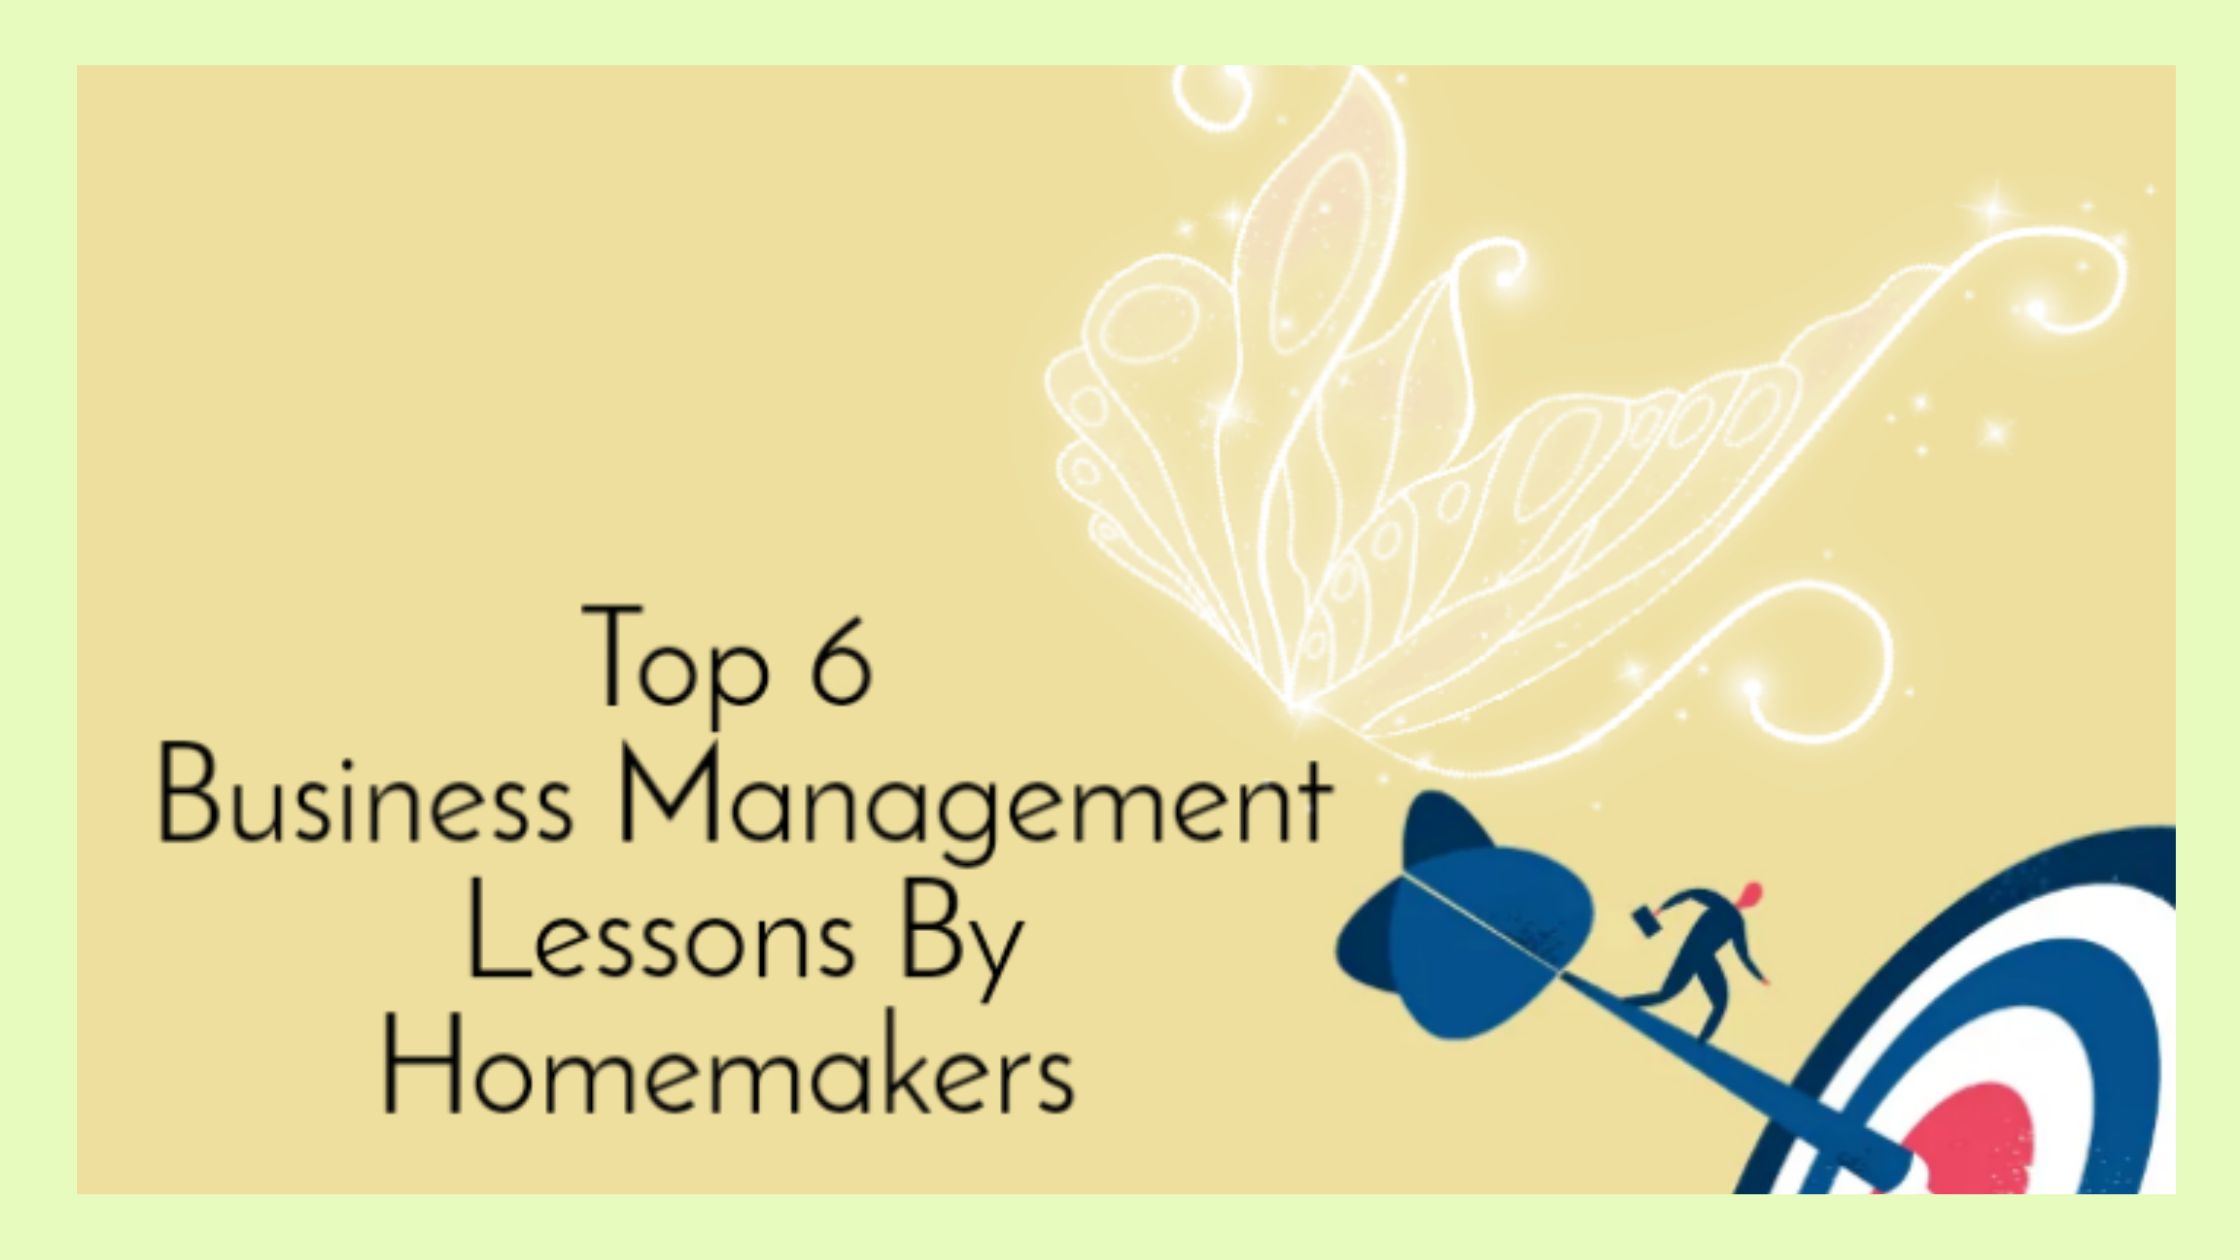 Top 6 Business Management Lessons By Homemakers